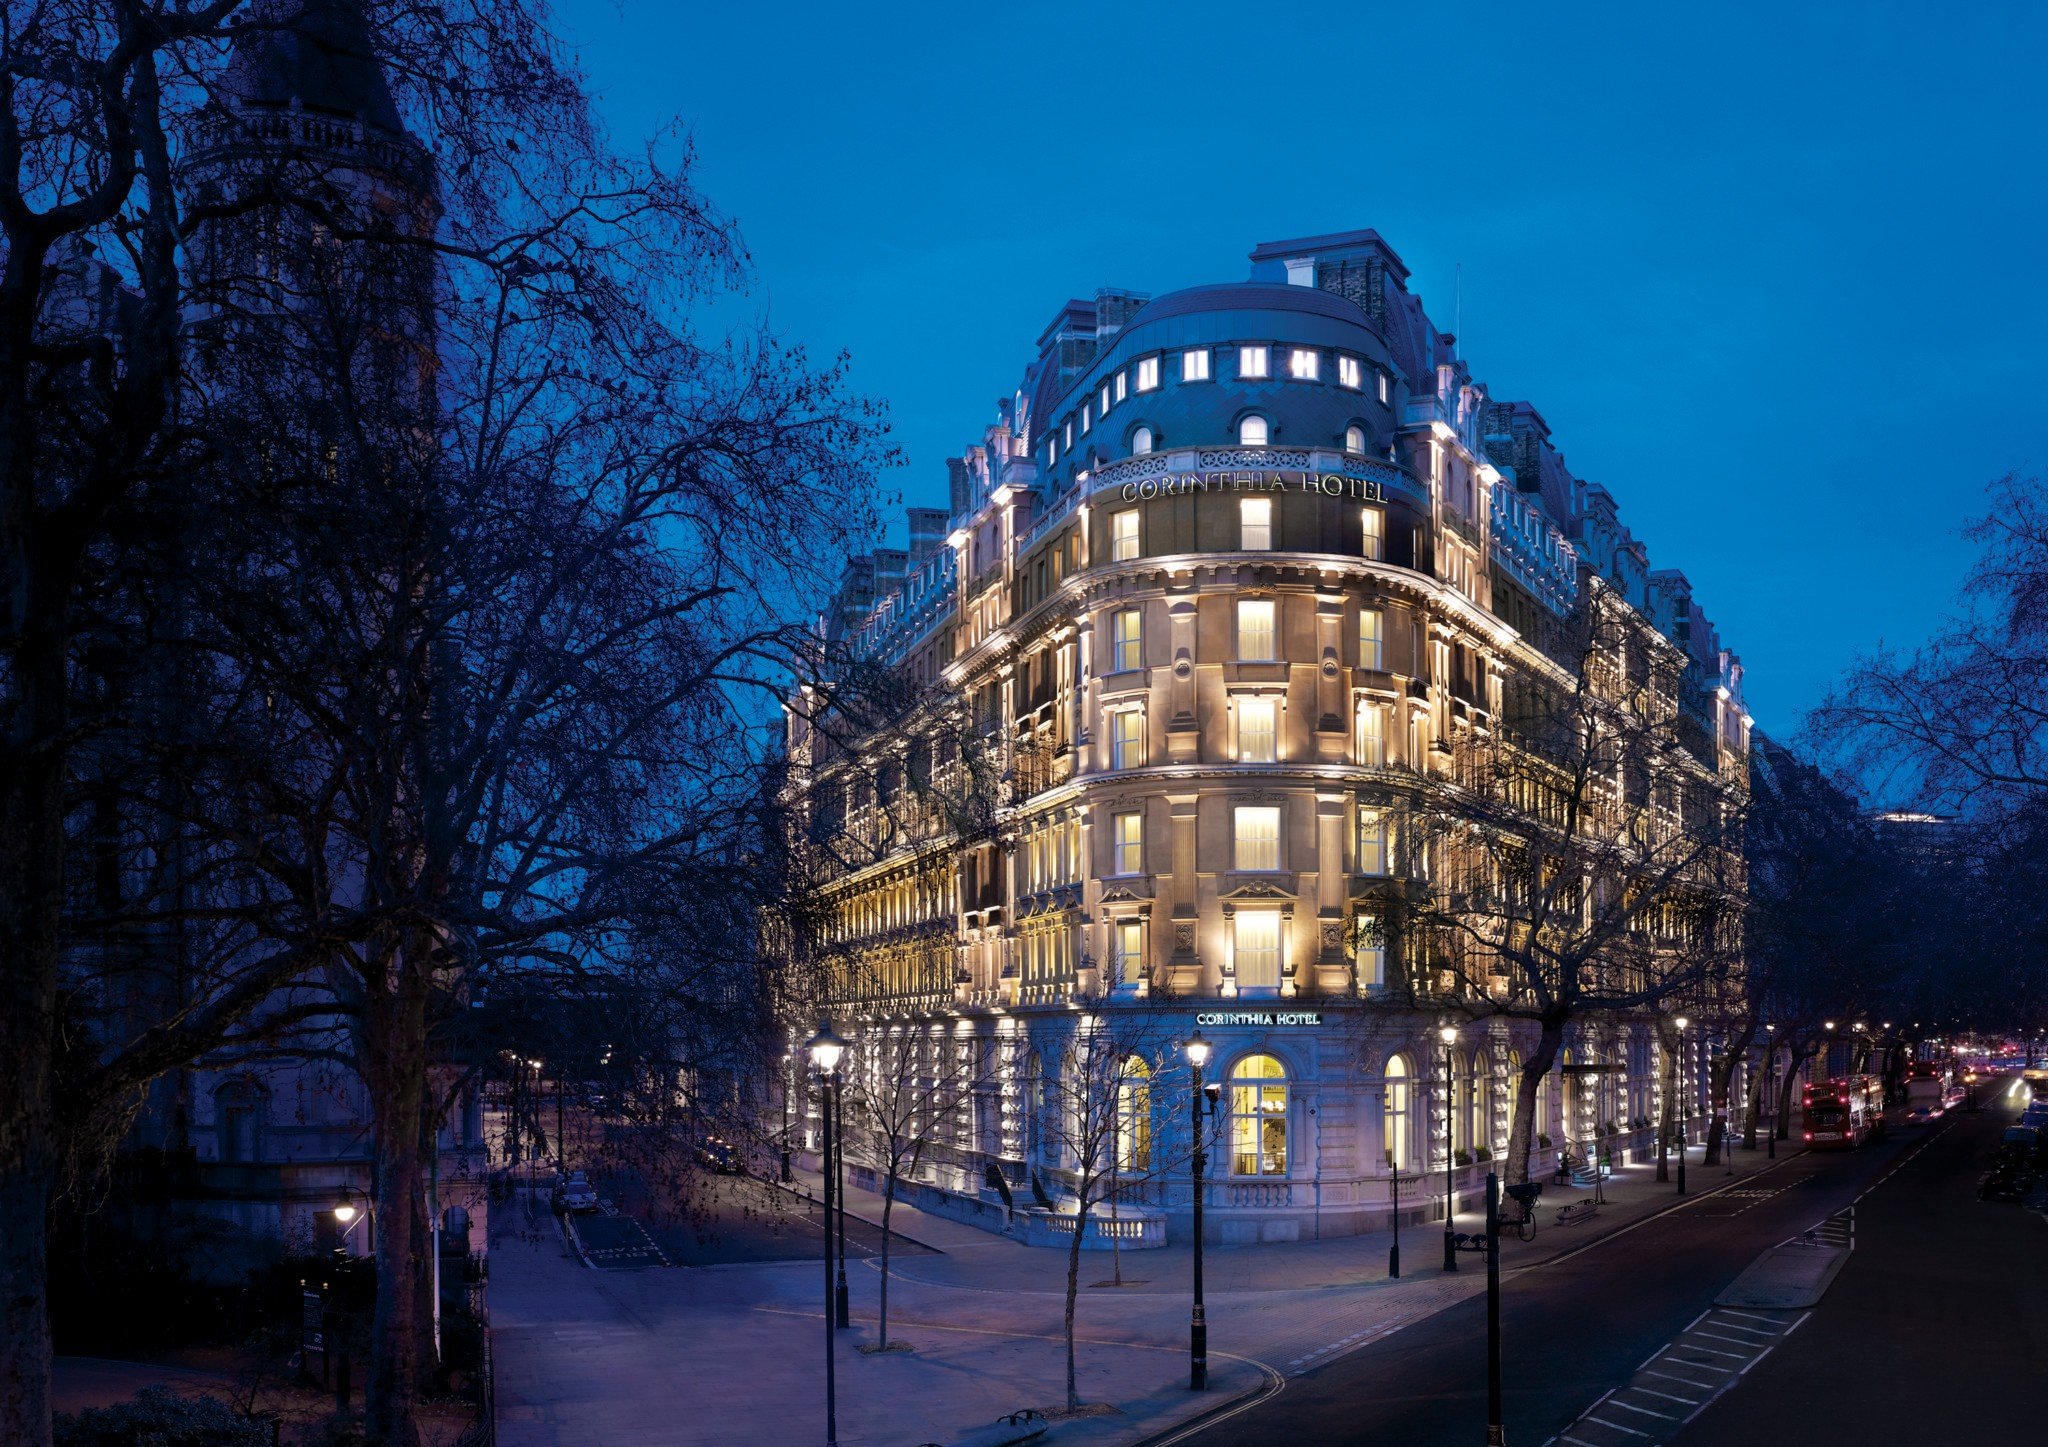 The 5-star Corinthia Hotel London in Whitehall was built in 1885. Photo: Handout